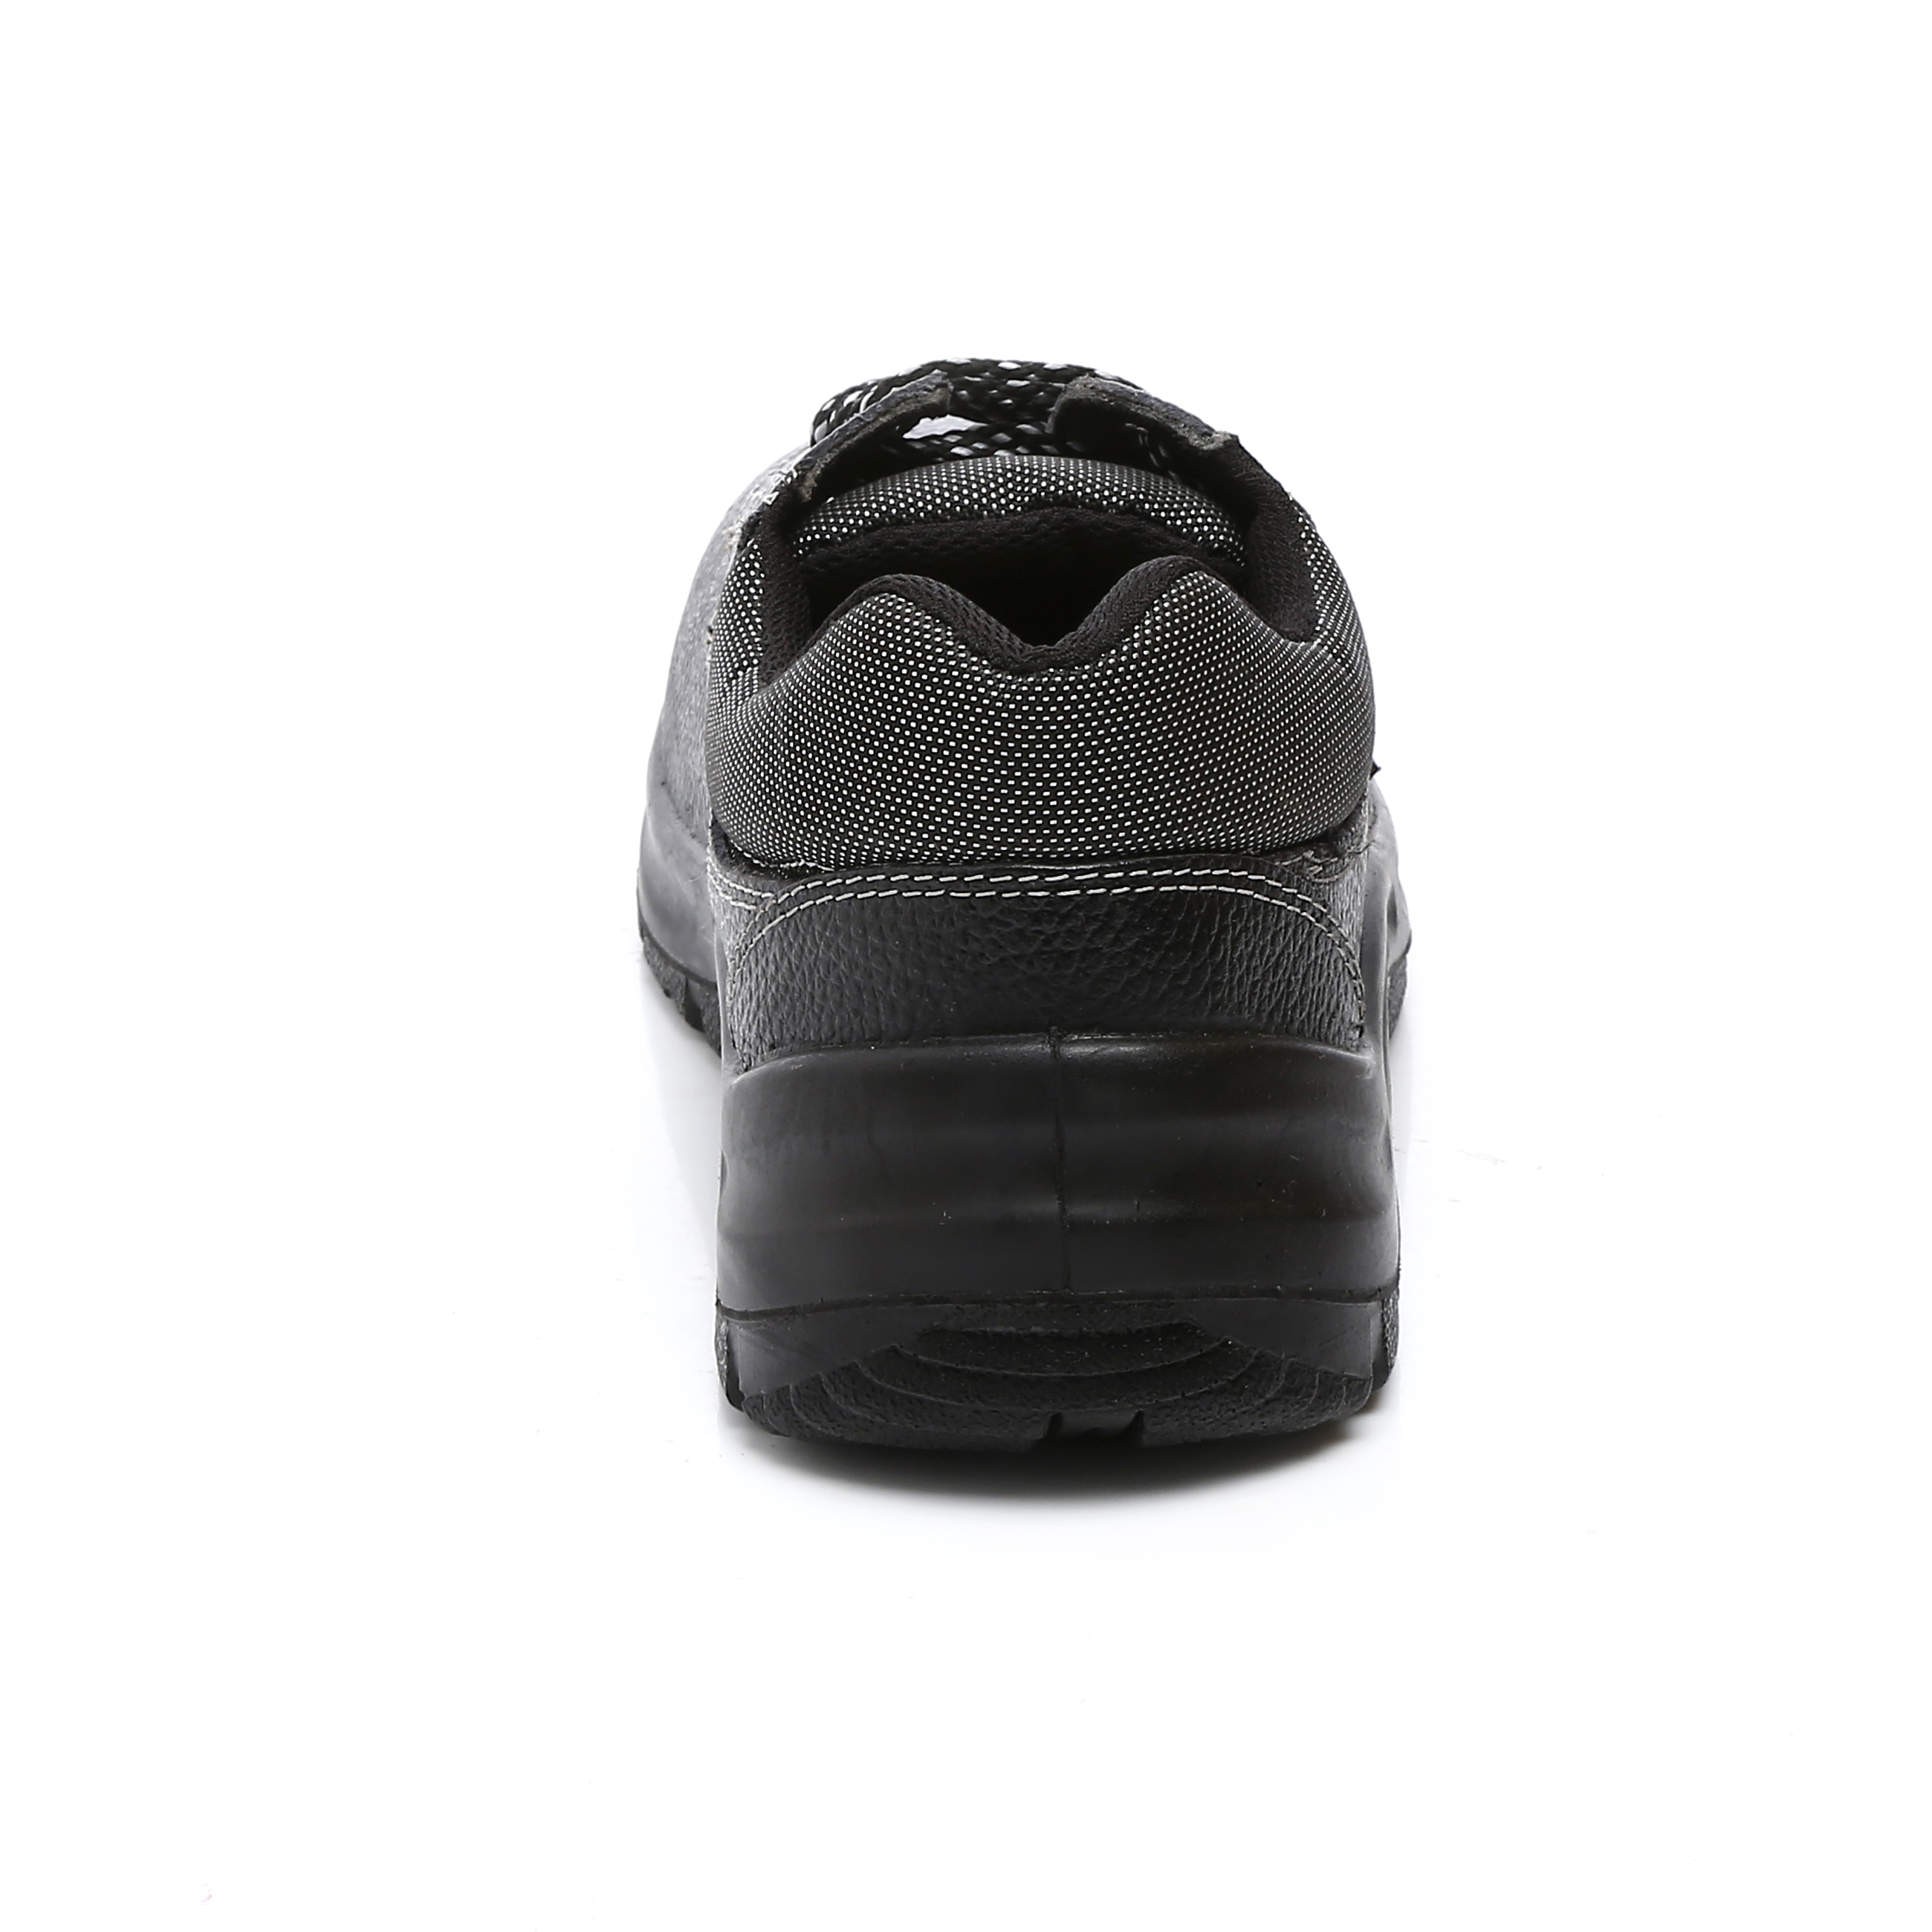 Pure Leather Safety Shoes